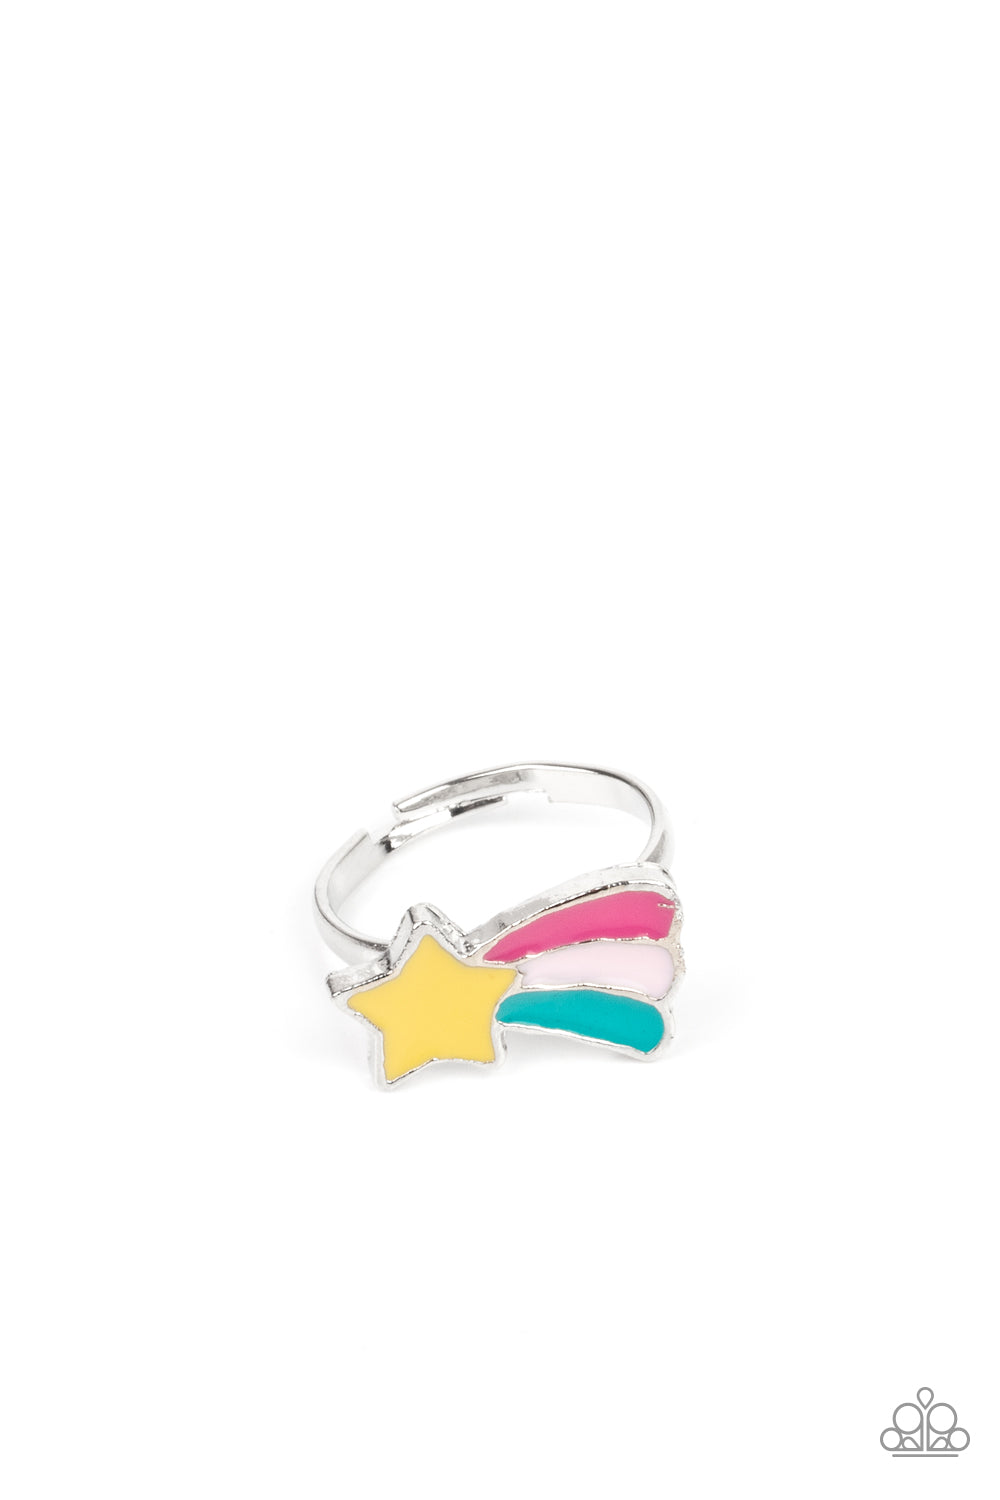 UNICORNS OF SEA AND LAND - ASSORTED SET OF 5 RINGS